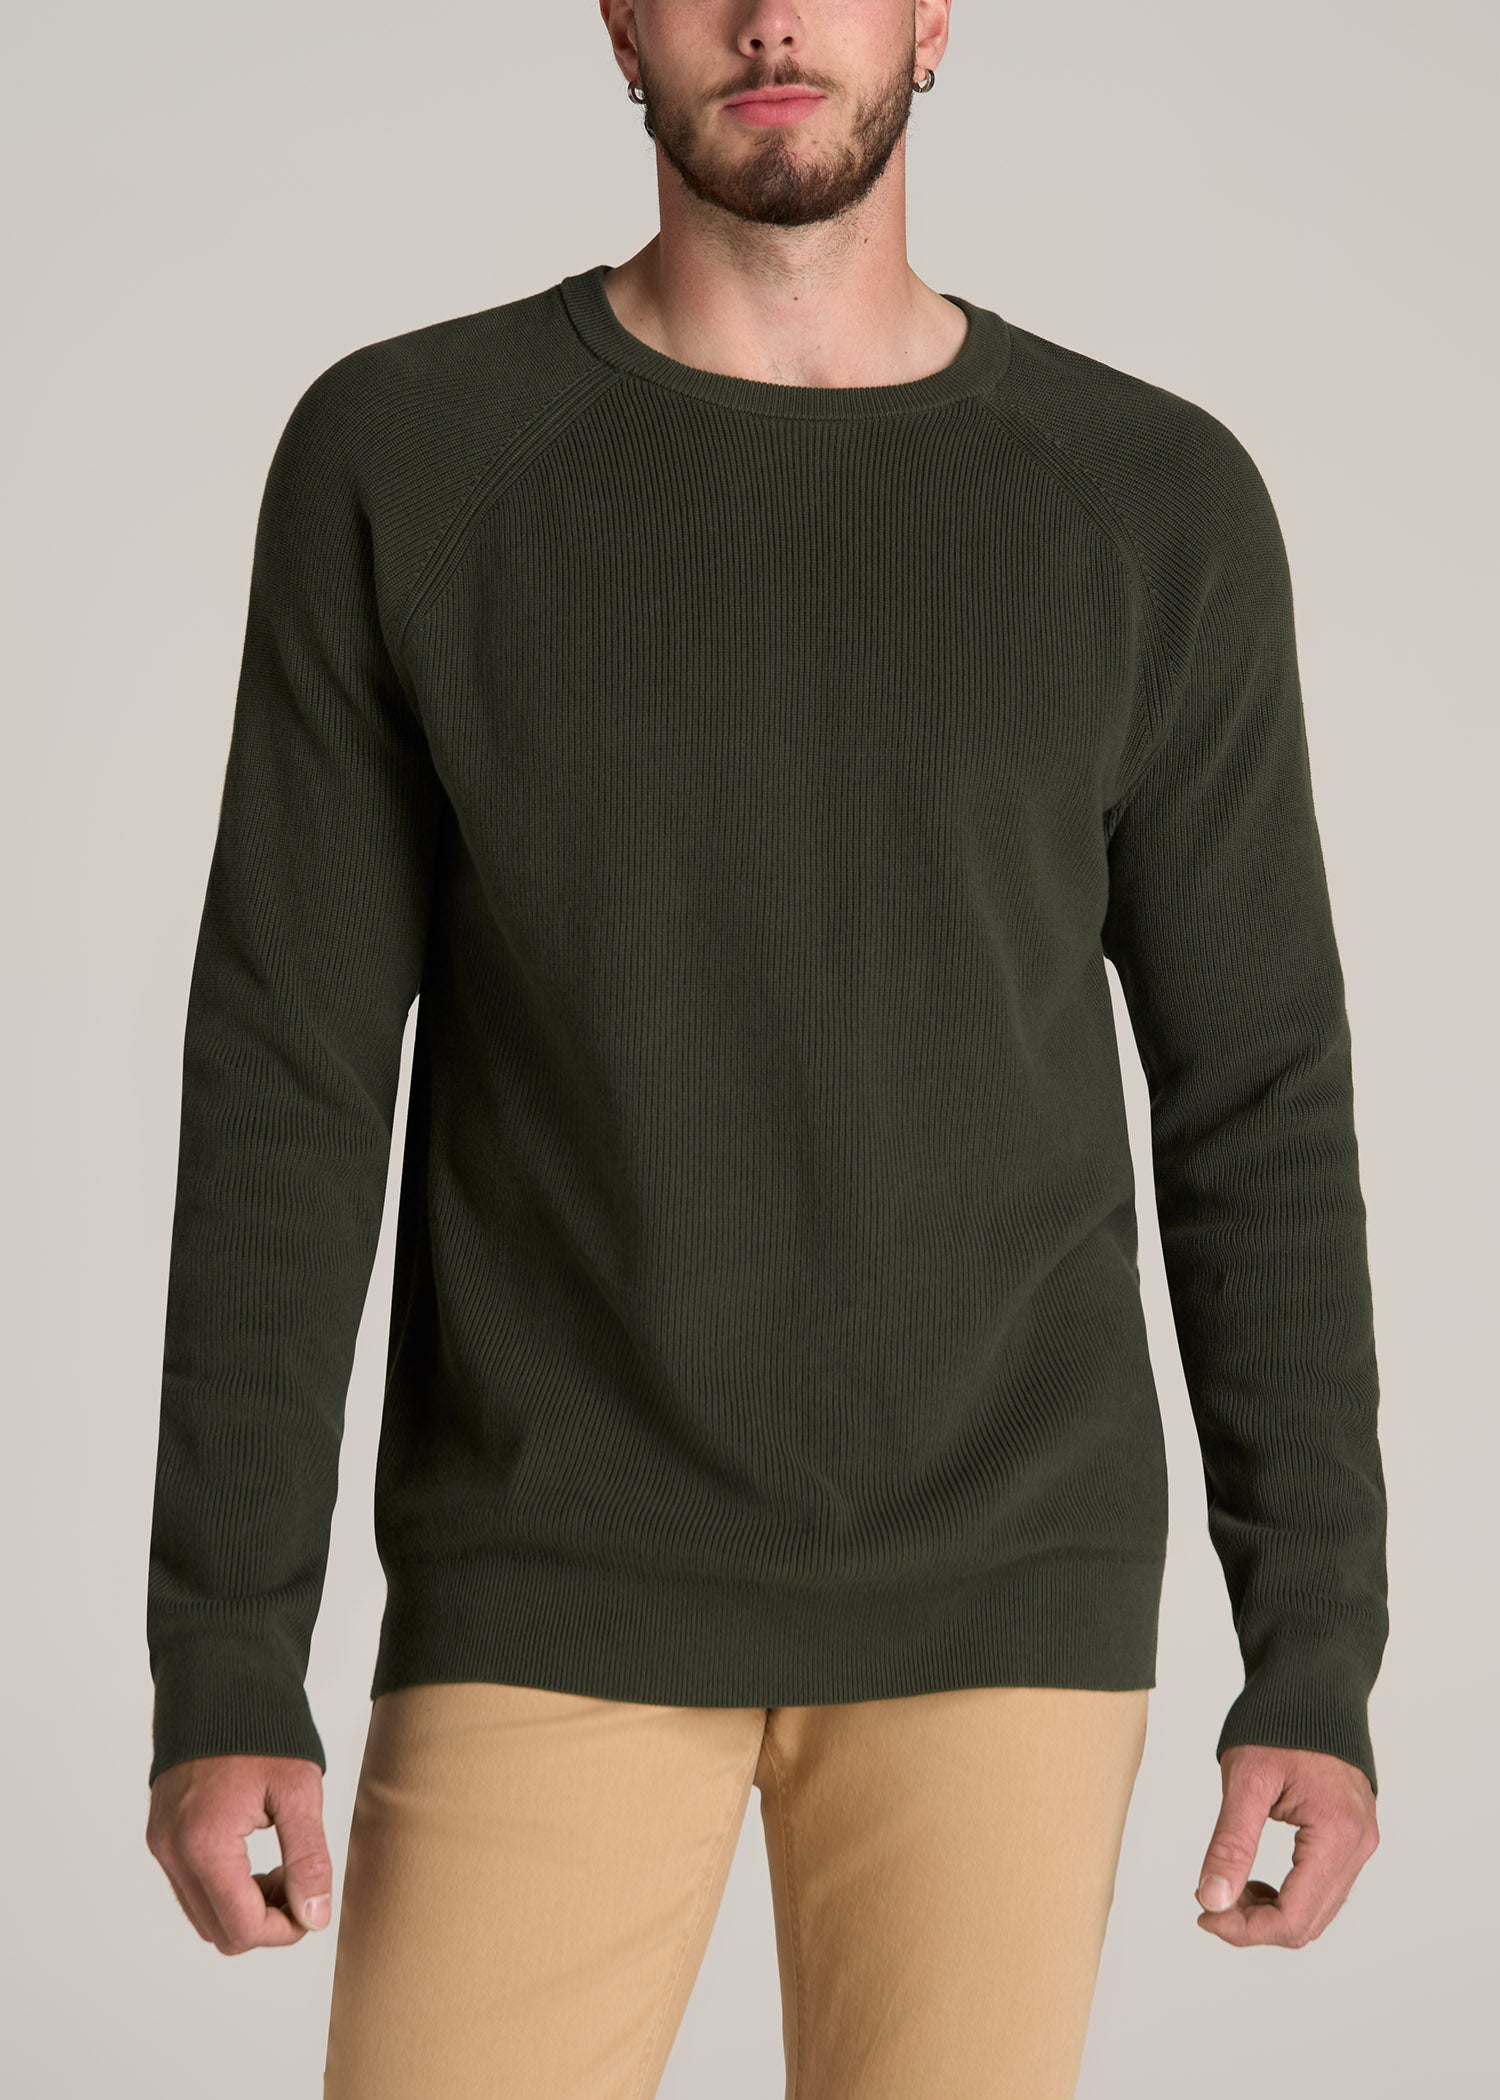 J. Crew Knit Ribbed Long Sleeve Crewneck Green Sweater Wool Mens XL  Pullover - Sweaters